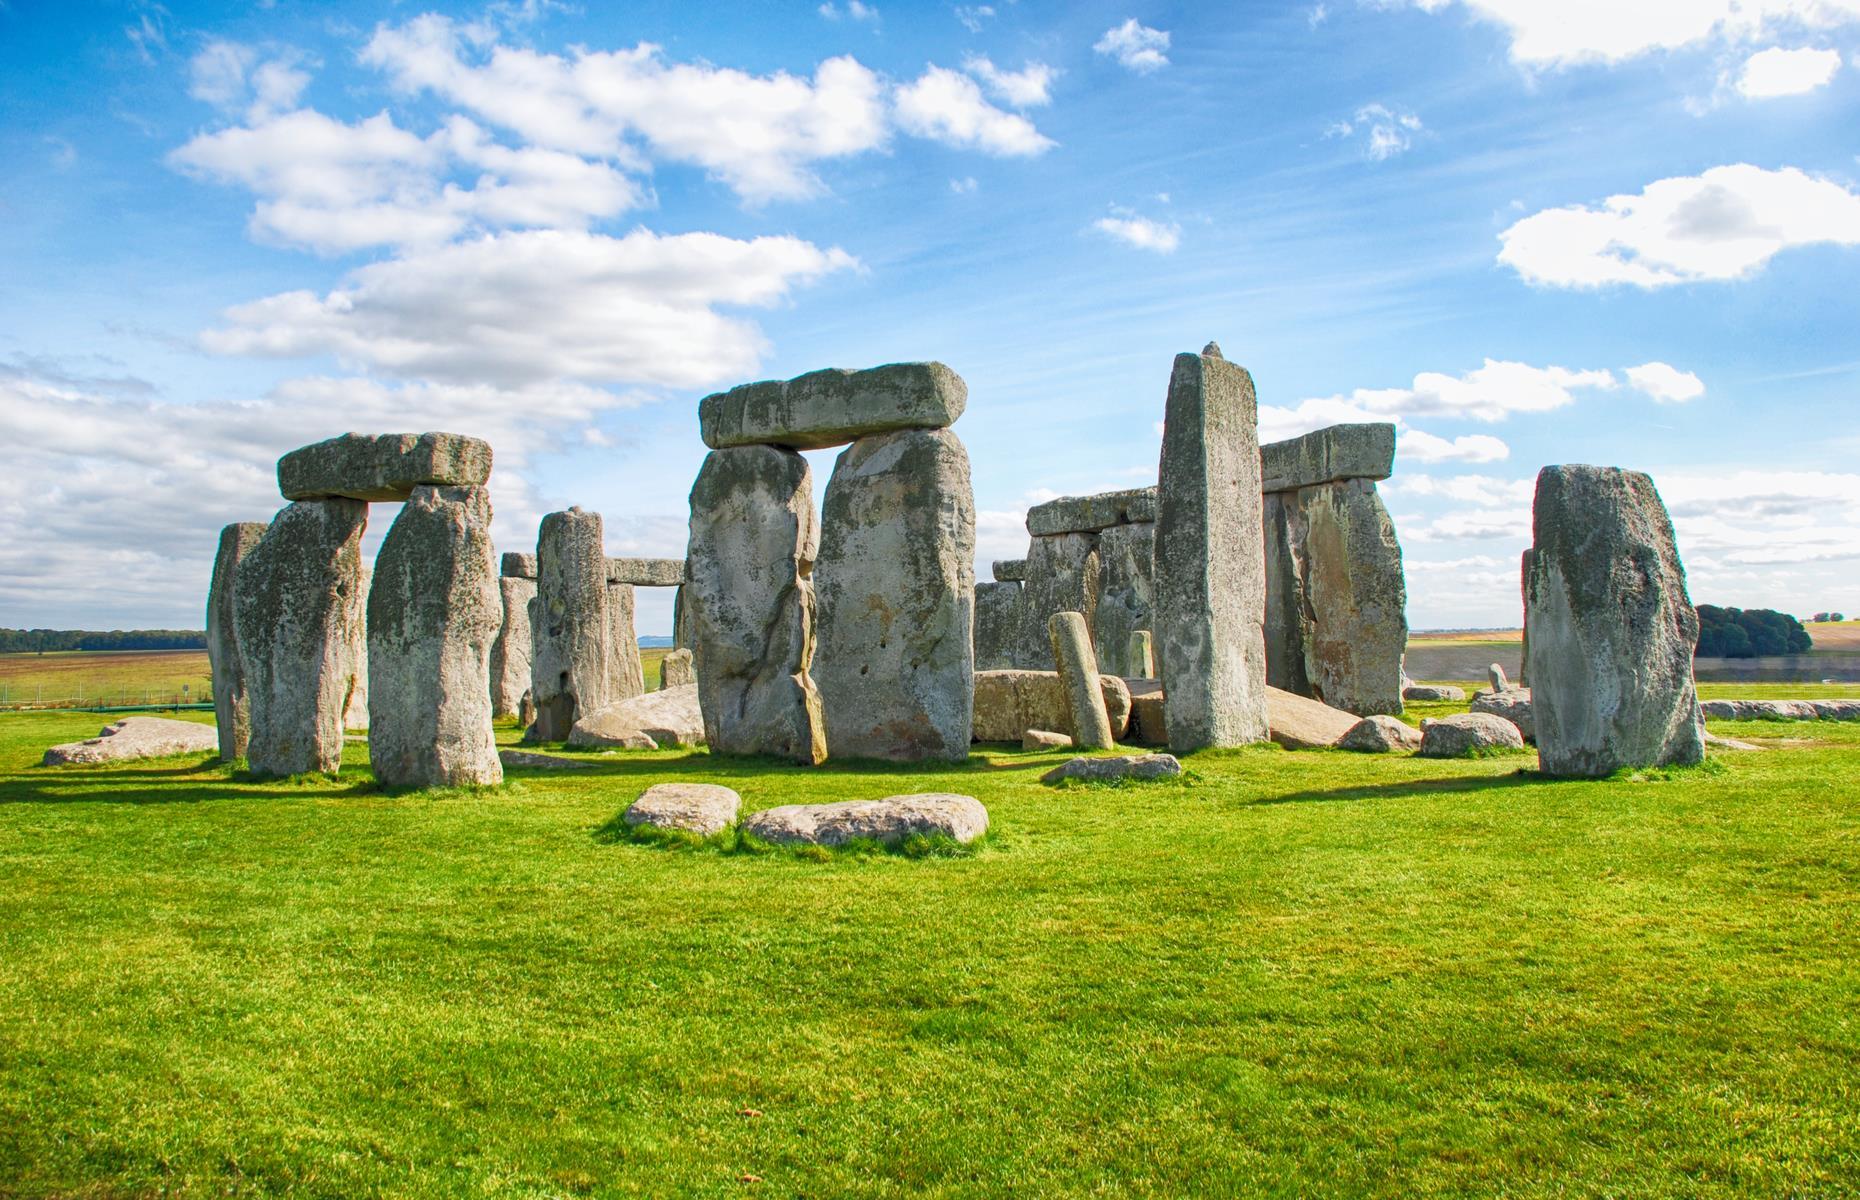 <p>Step back in time to discover some of the world’s most incredible ancient monuments and cities that were once home to mighty and fascinating civilizations. From Italy to Iran, Egypt to England (plus many more), these countries boast splendors of the past that you can visit in the present. </p>  <p><strong>Read on to discover some of the top spots around the globe for history lovers...</strong></p>